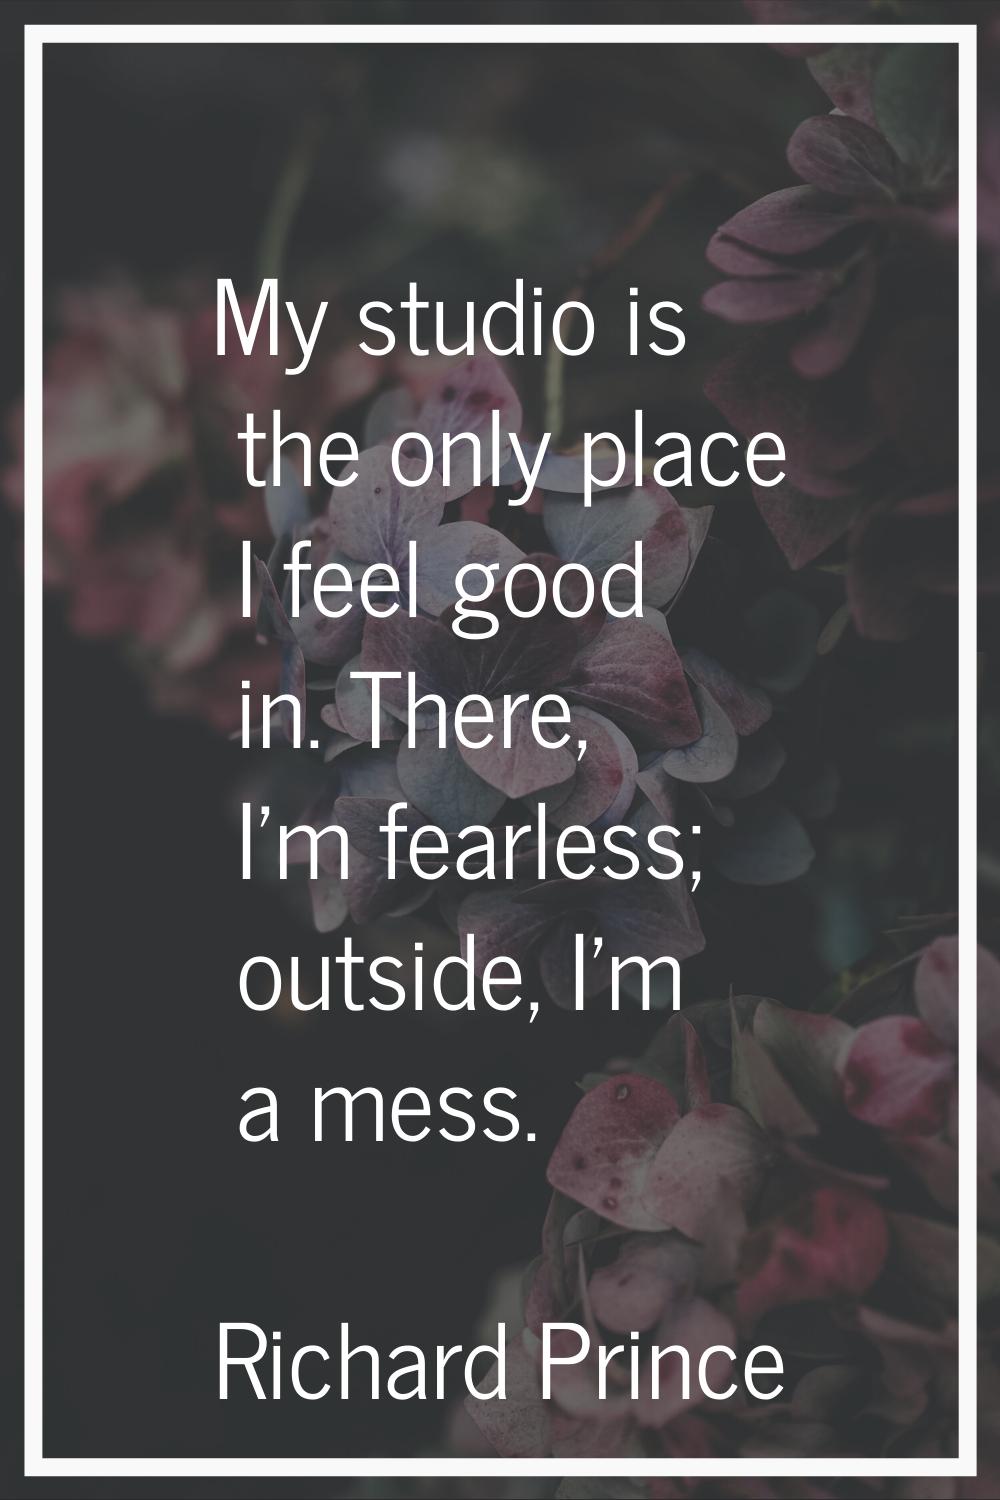 My studio is the only place I feel good in. There, I'm fearless; outside, I'm a mess.